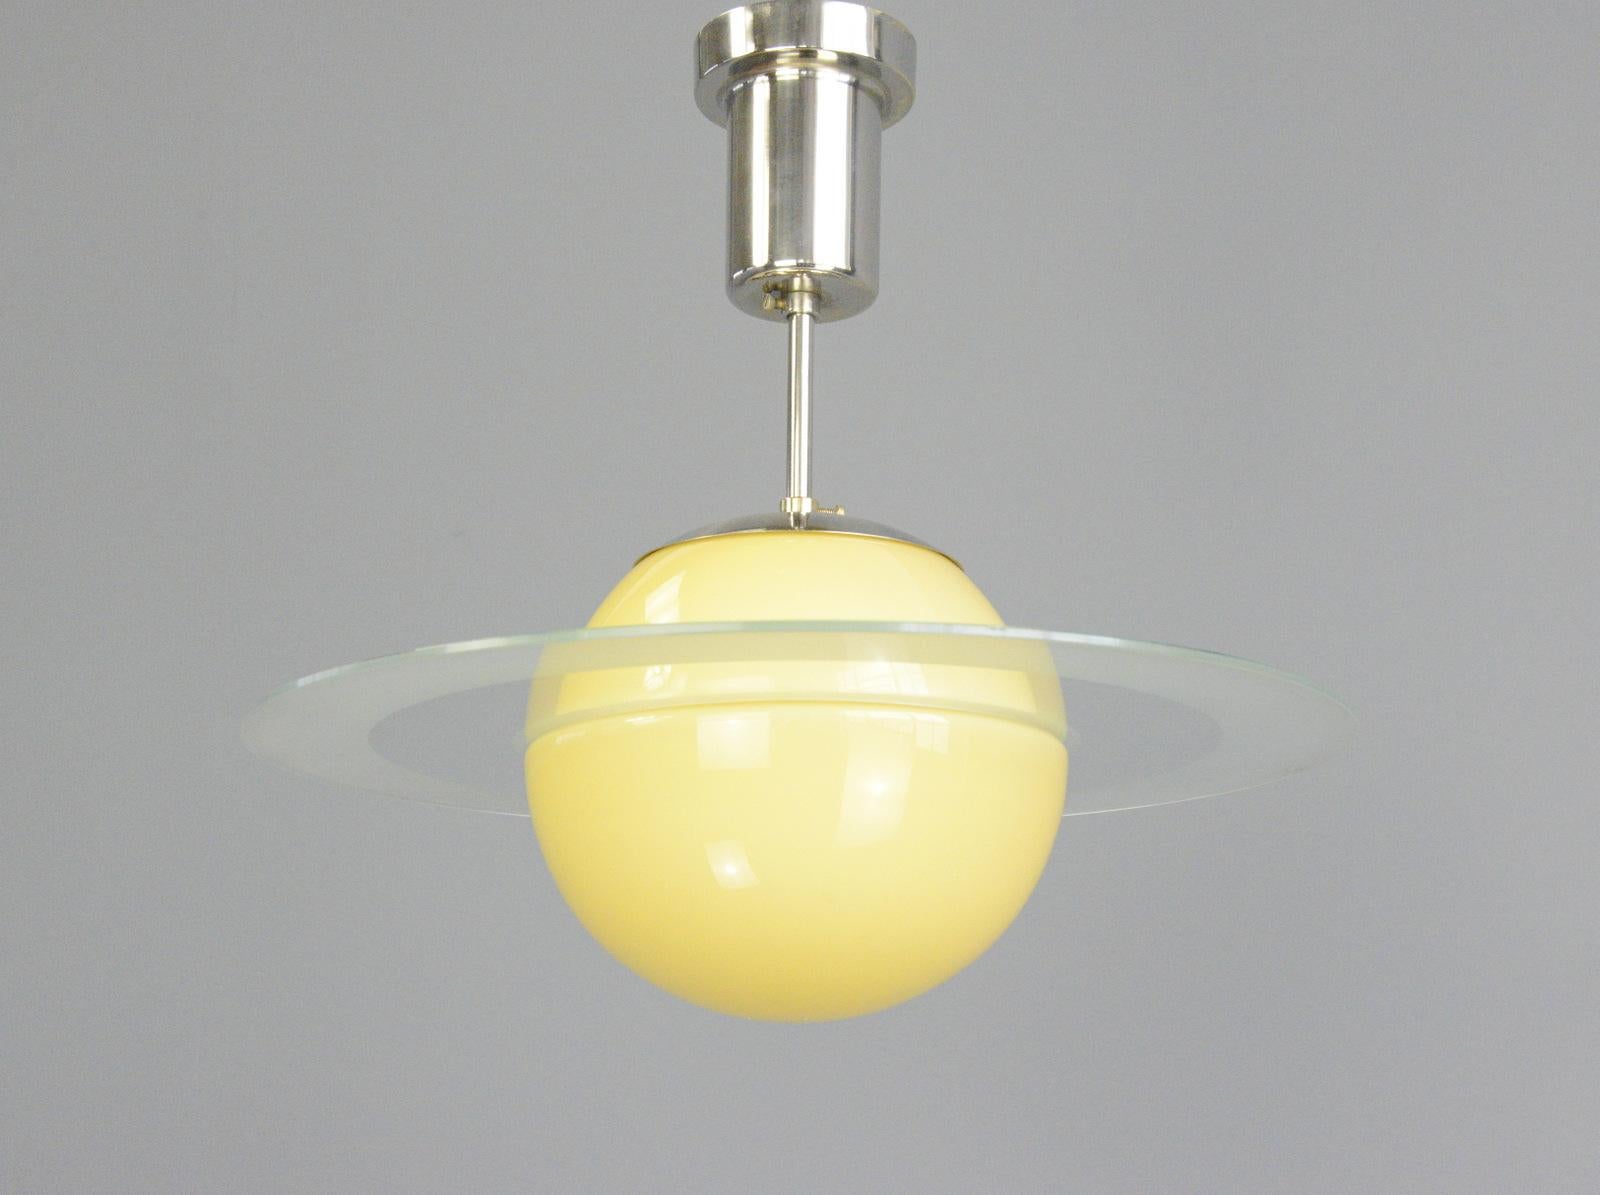 Swedish Art Deco Saturnus light Circa 1930s.

- Yellow glass globes with glass ring
- Original nickel top and ceiling rose
- Takes E27 fitting bulbs
- Swedish ~ 1930s
- 40cm wide x 38cm tall inc ceiling rose

Condition Report

Fully re